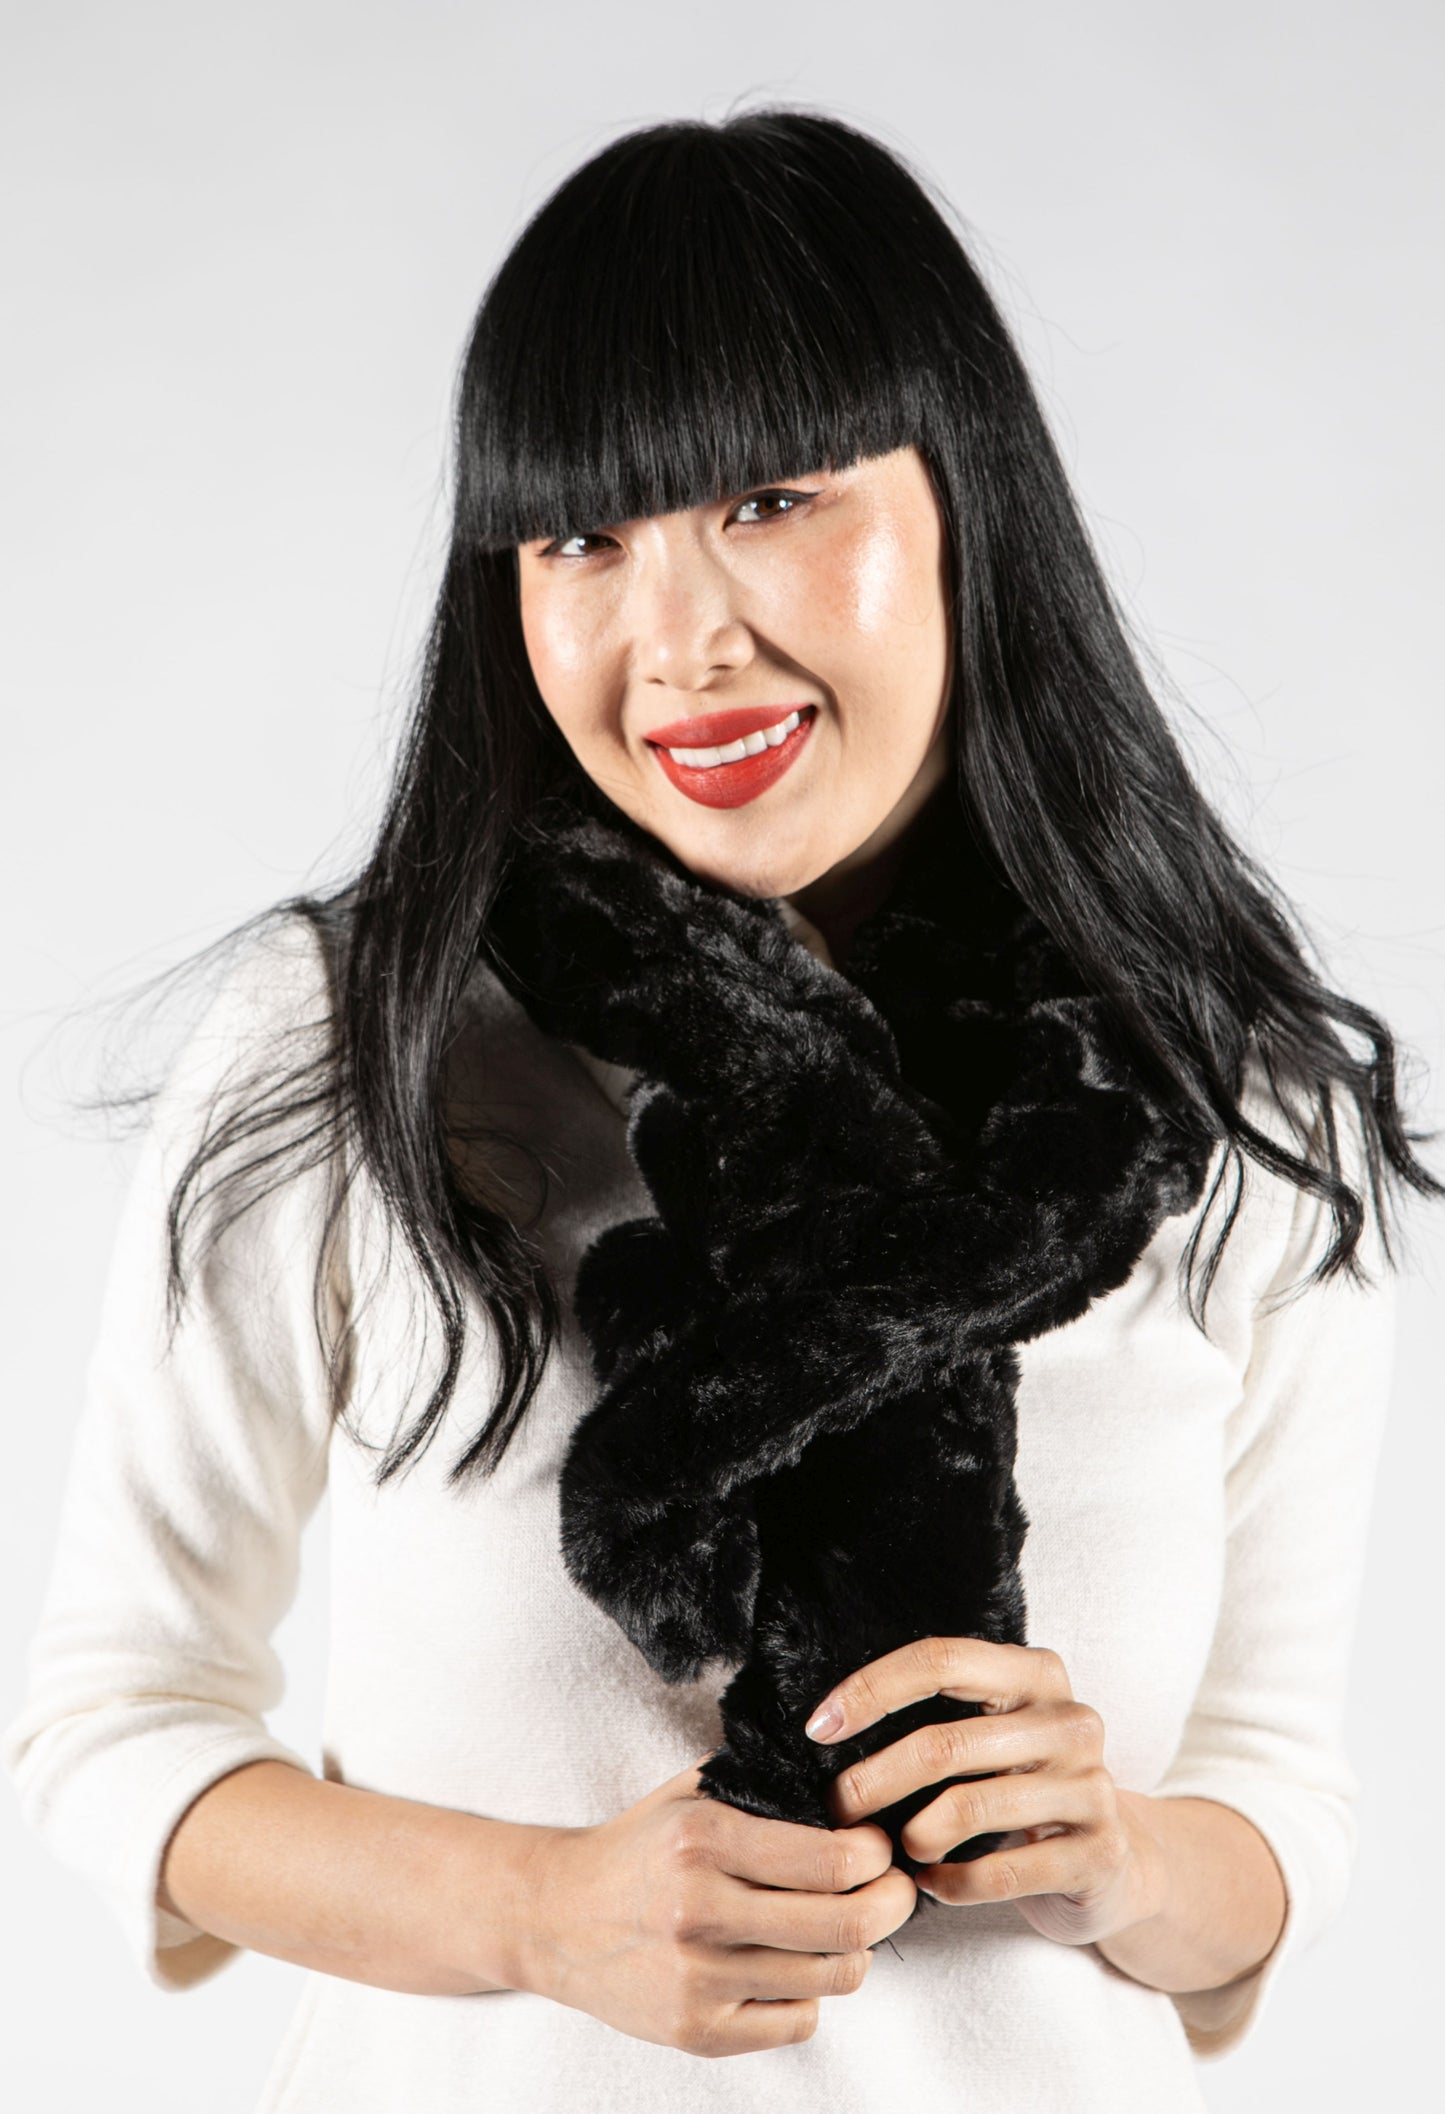 Faux Fur Gathered Look Scarf